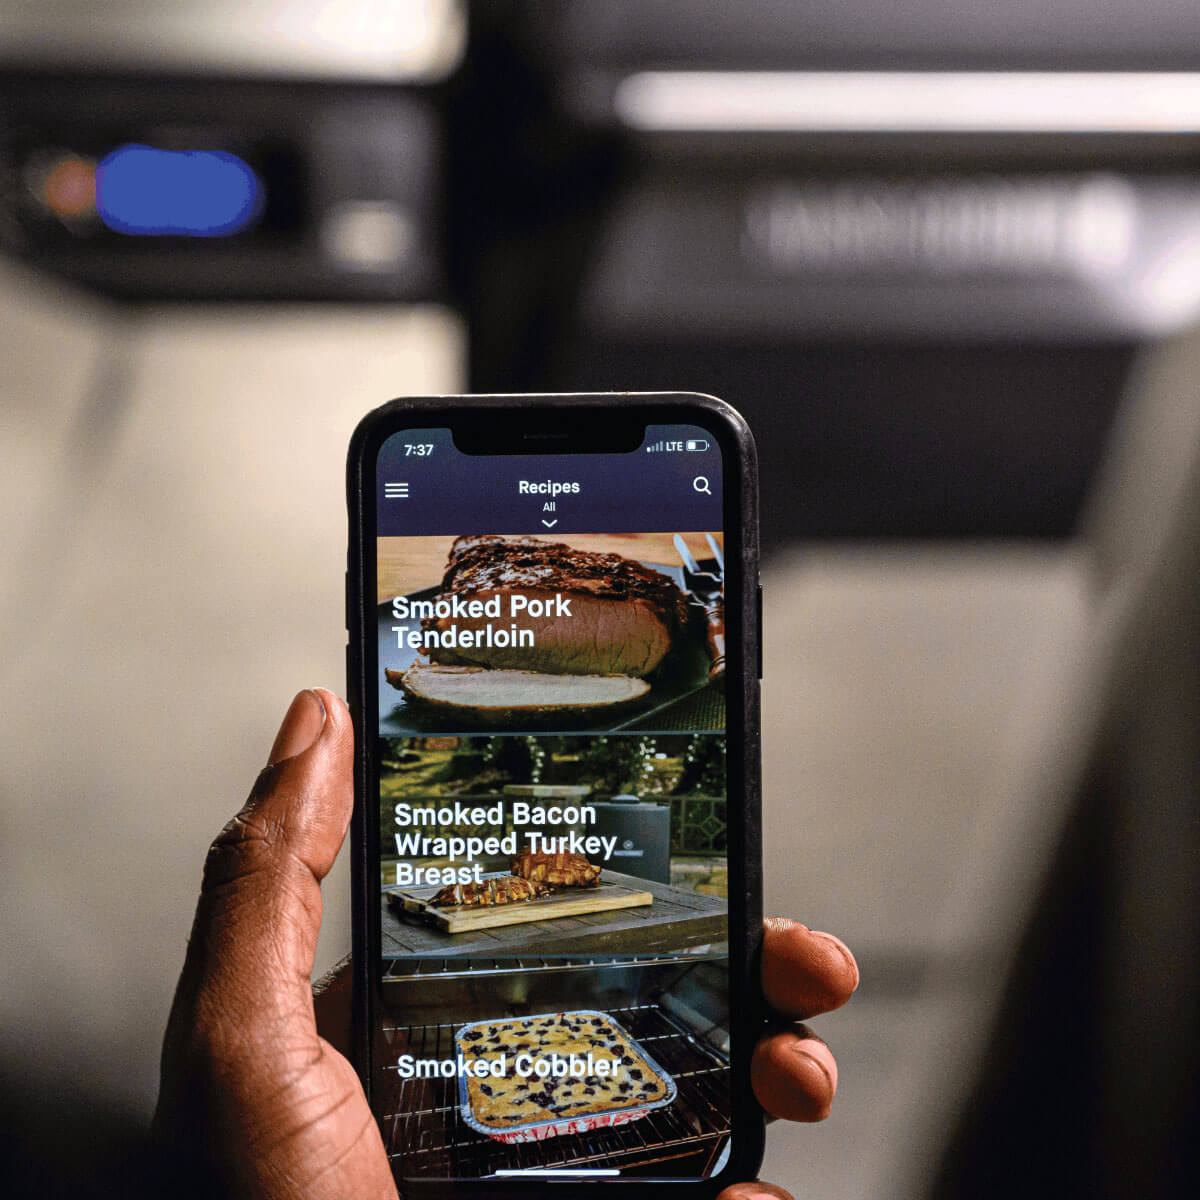 Set it and go with your smart device. Learn to master the art of smoking, grilling and more with the Masterbuilt App